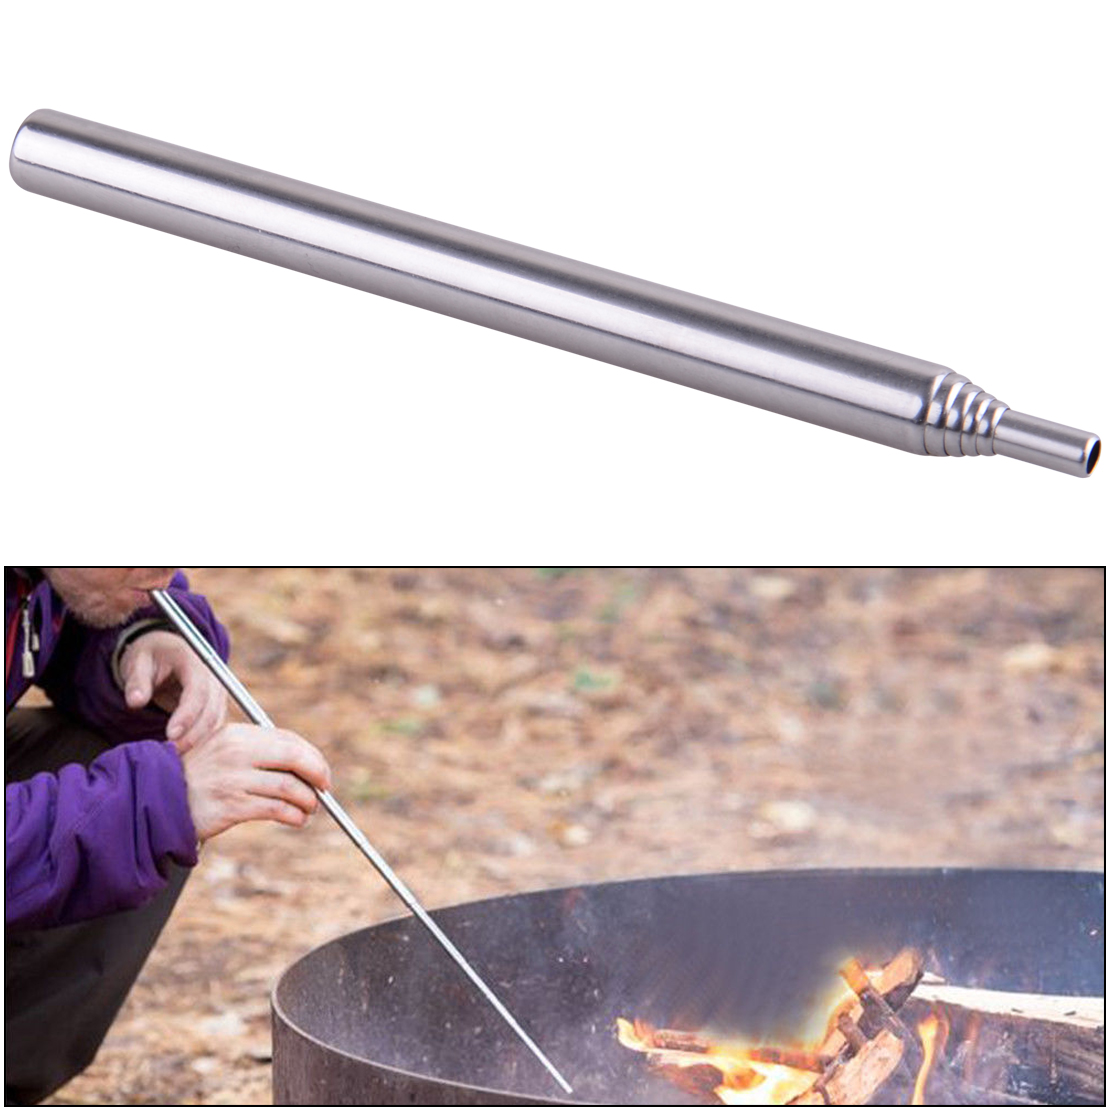 Stainless Collapsible-Pocket Bellows Make-Fire Tool By Blasting-Air Camping